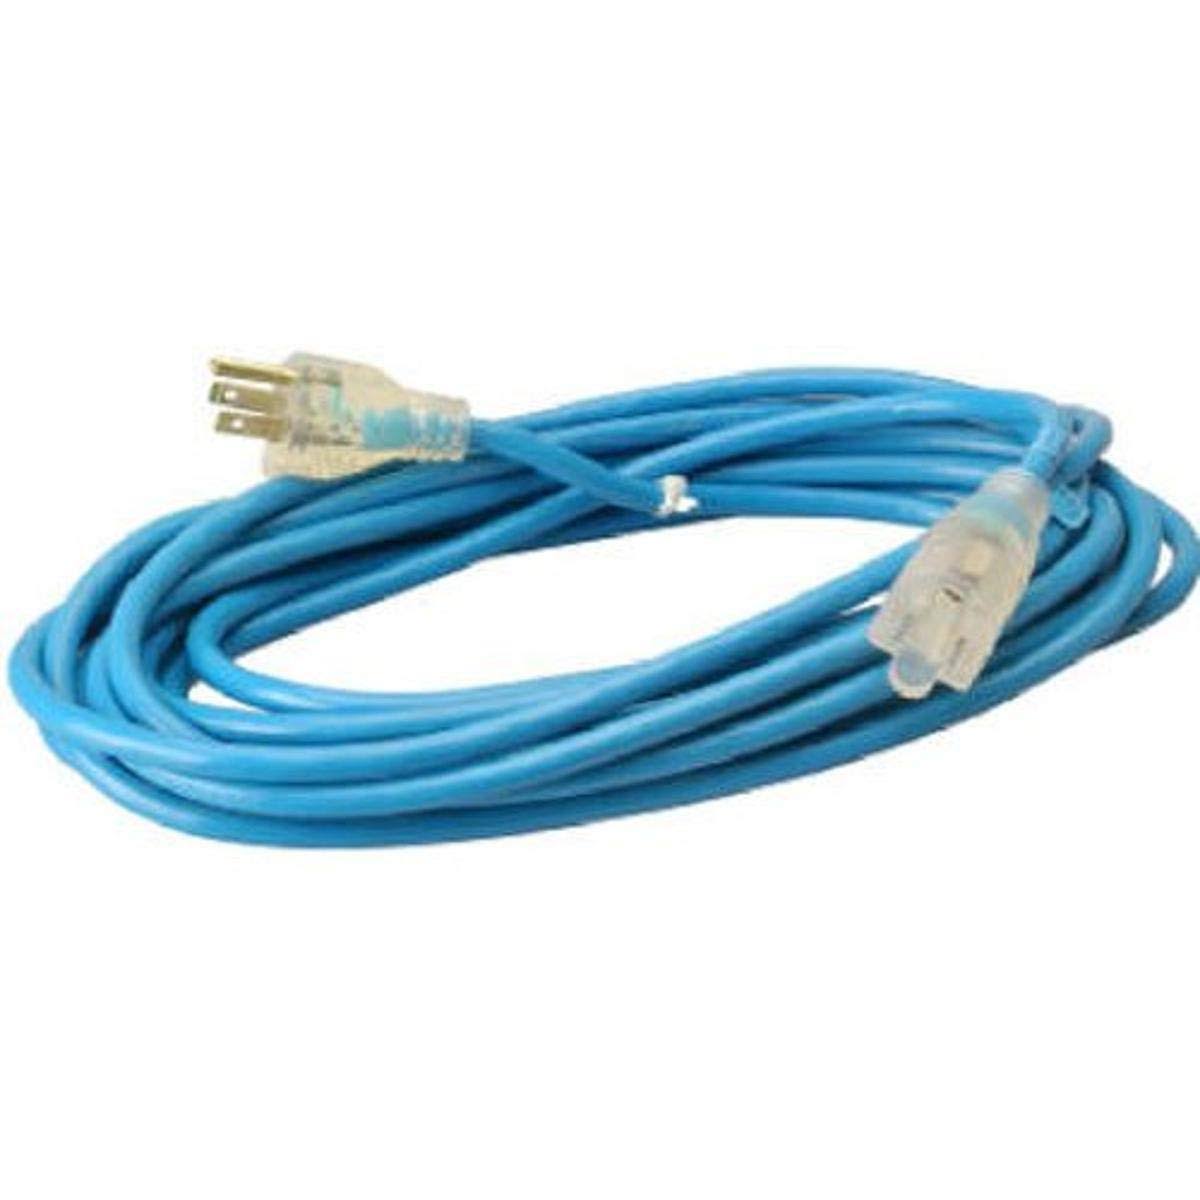 Master Electrician Premium All Weather Extension Cord - Blue, 25ft